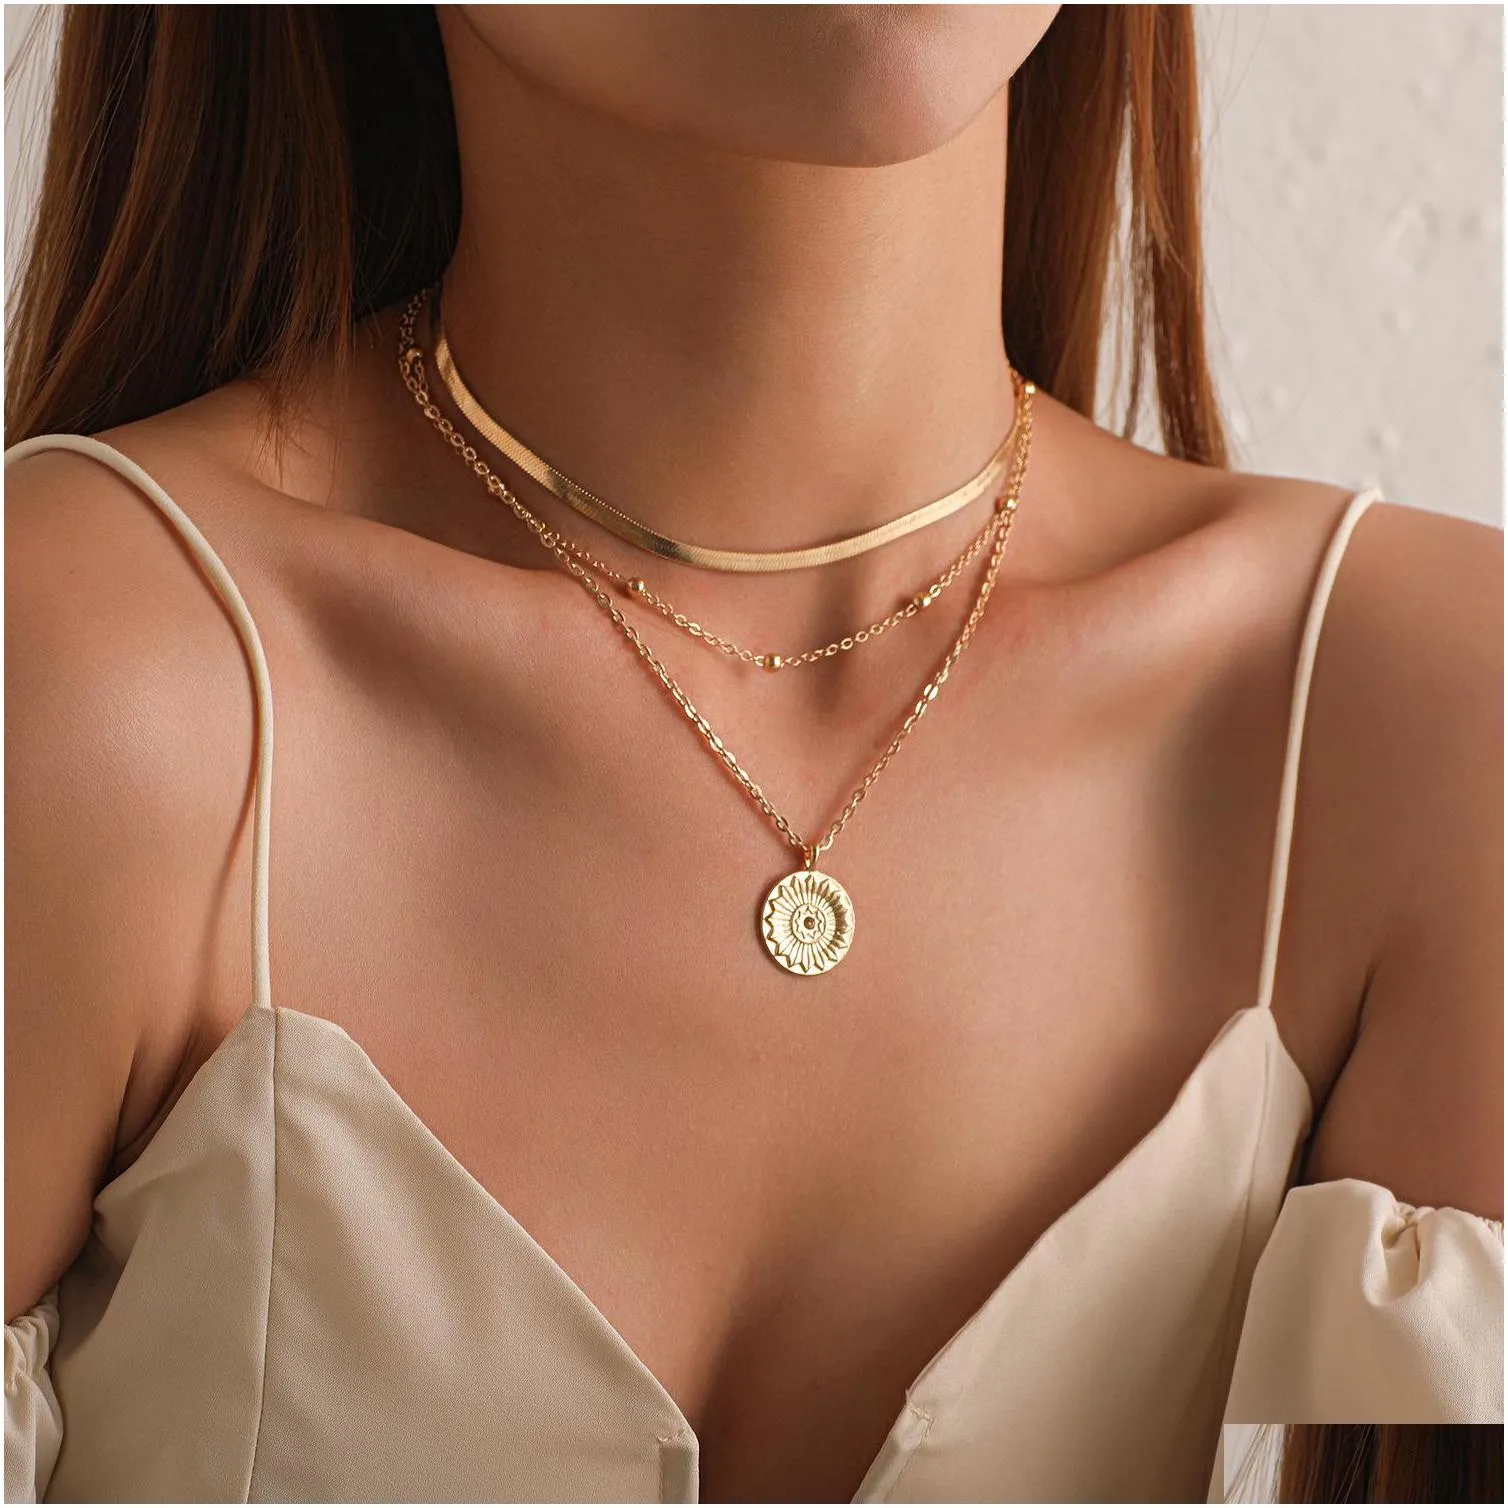 Pendant Necklaces Sier Gold Chains Mtilayer Choker Necklace Pendant Necklaces Wrap Women Fashion Jewelry Will And Sandy Gift Jewelry N Dhlsw